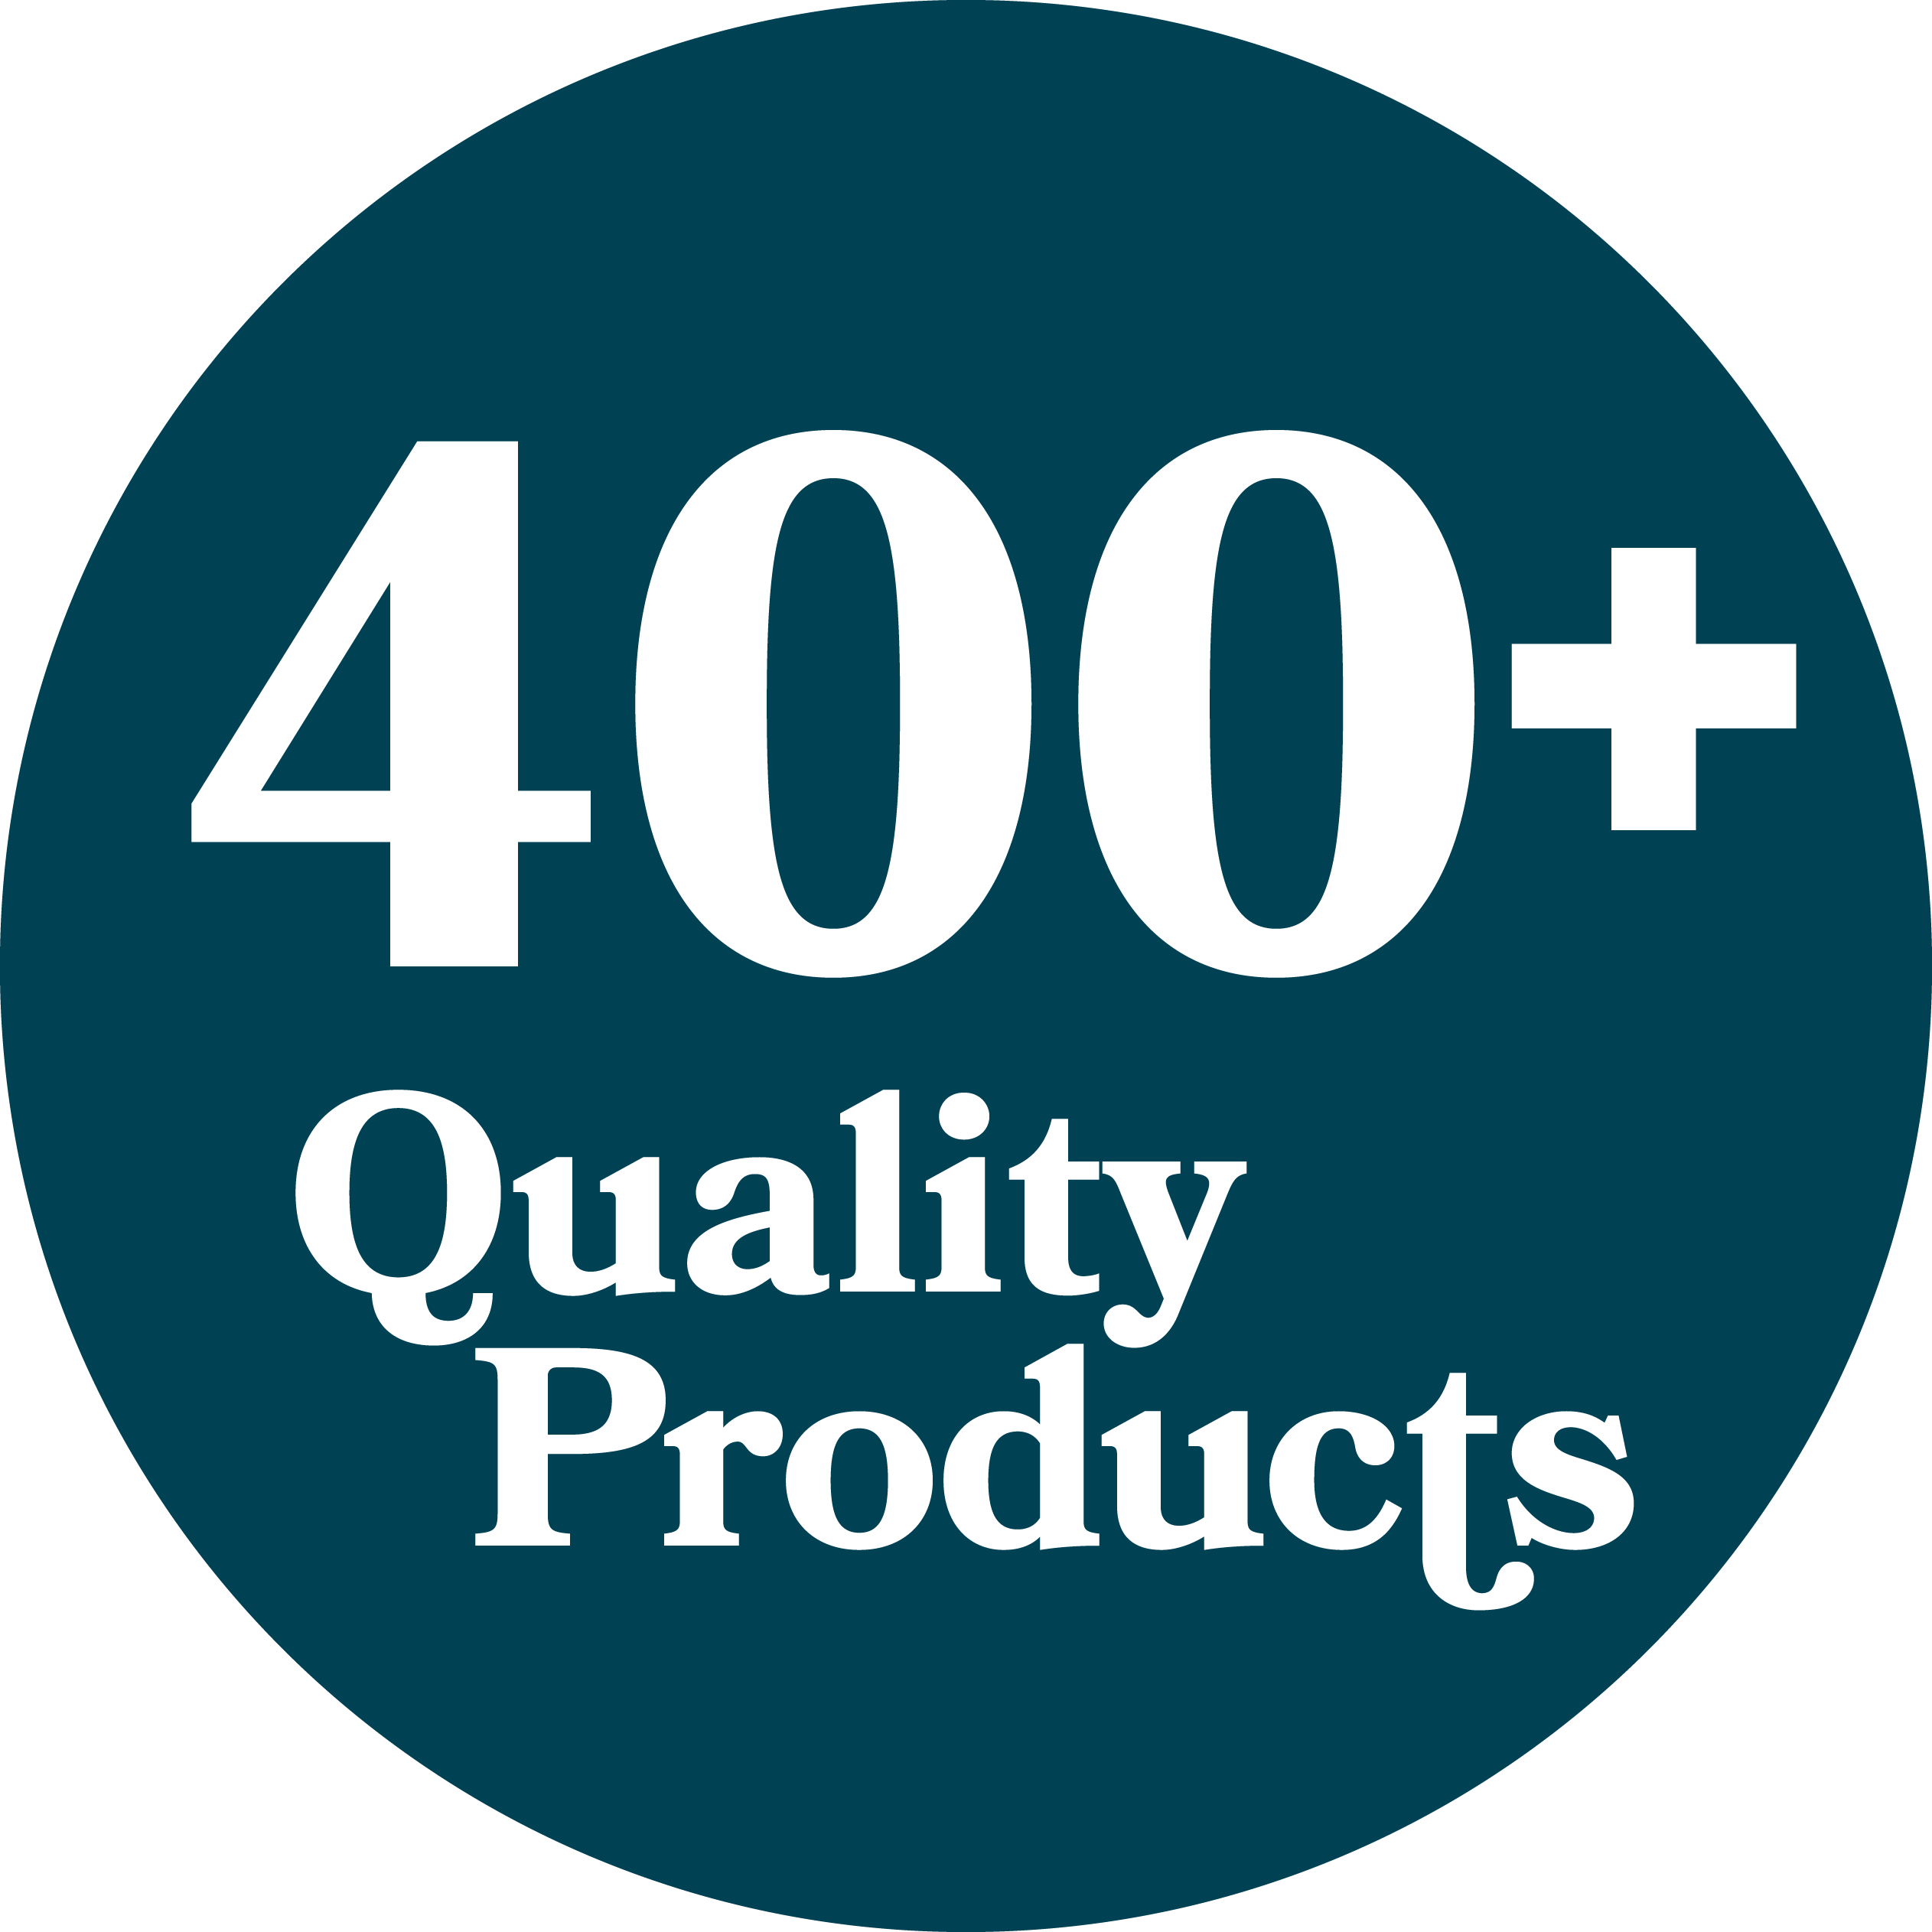 Over 400+ quality products